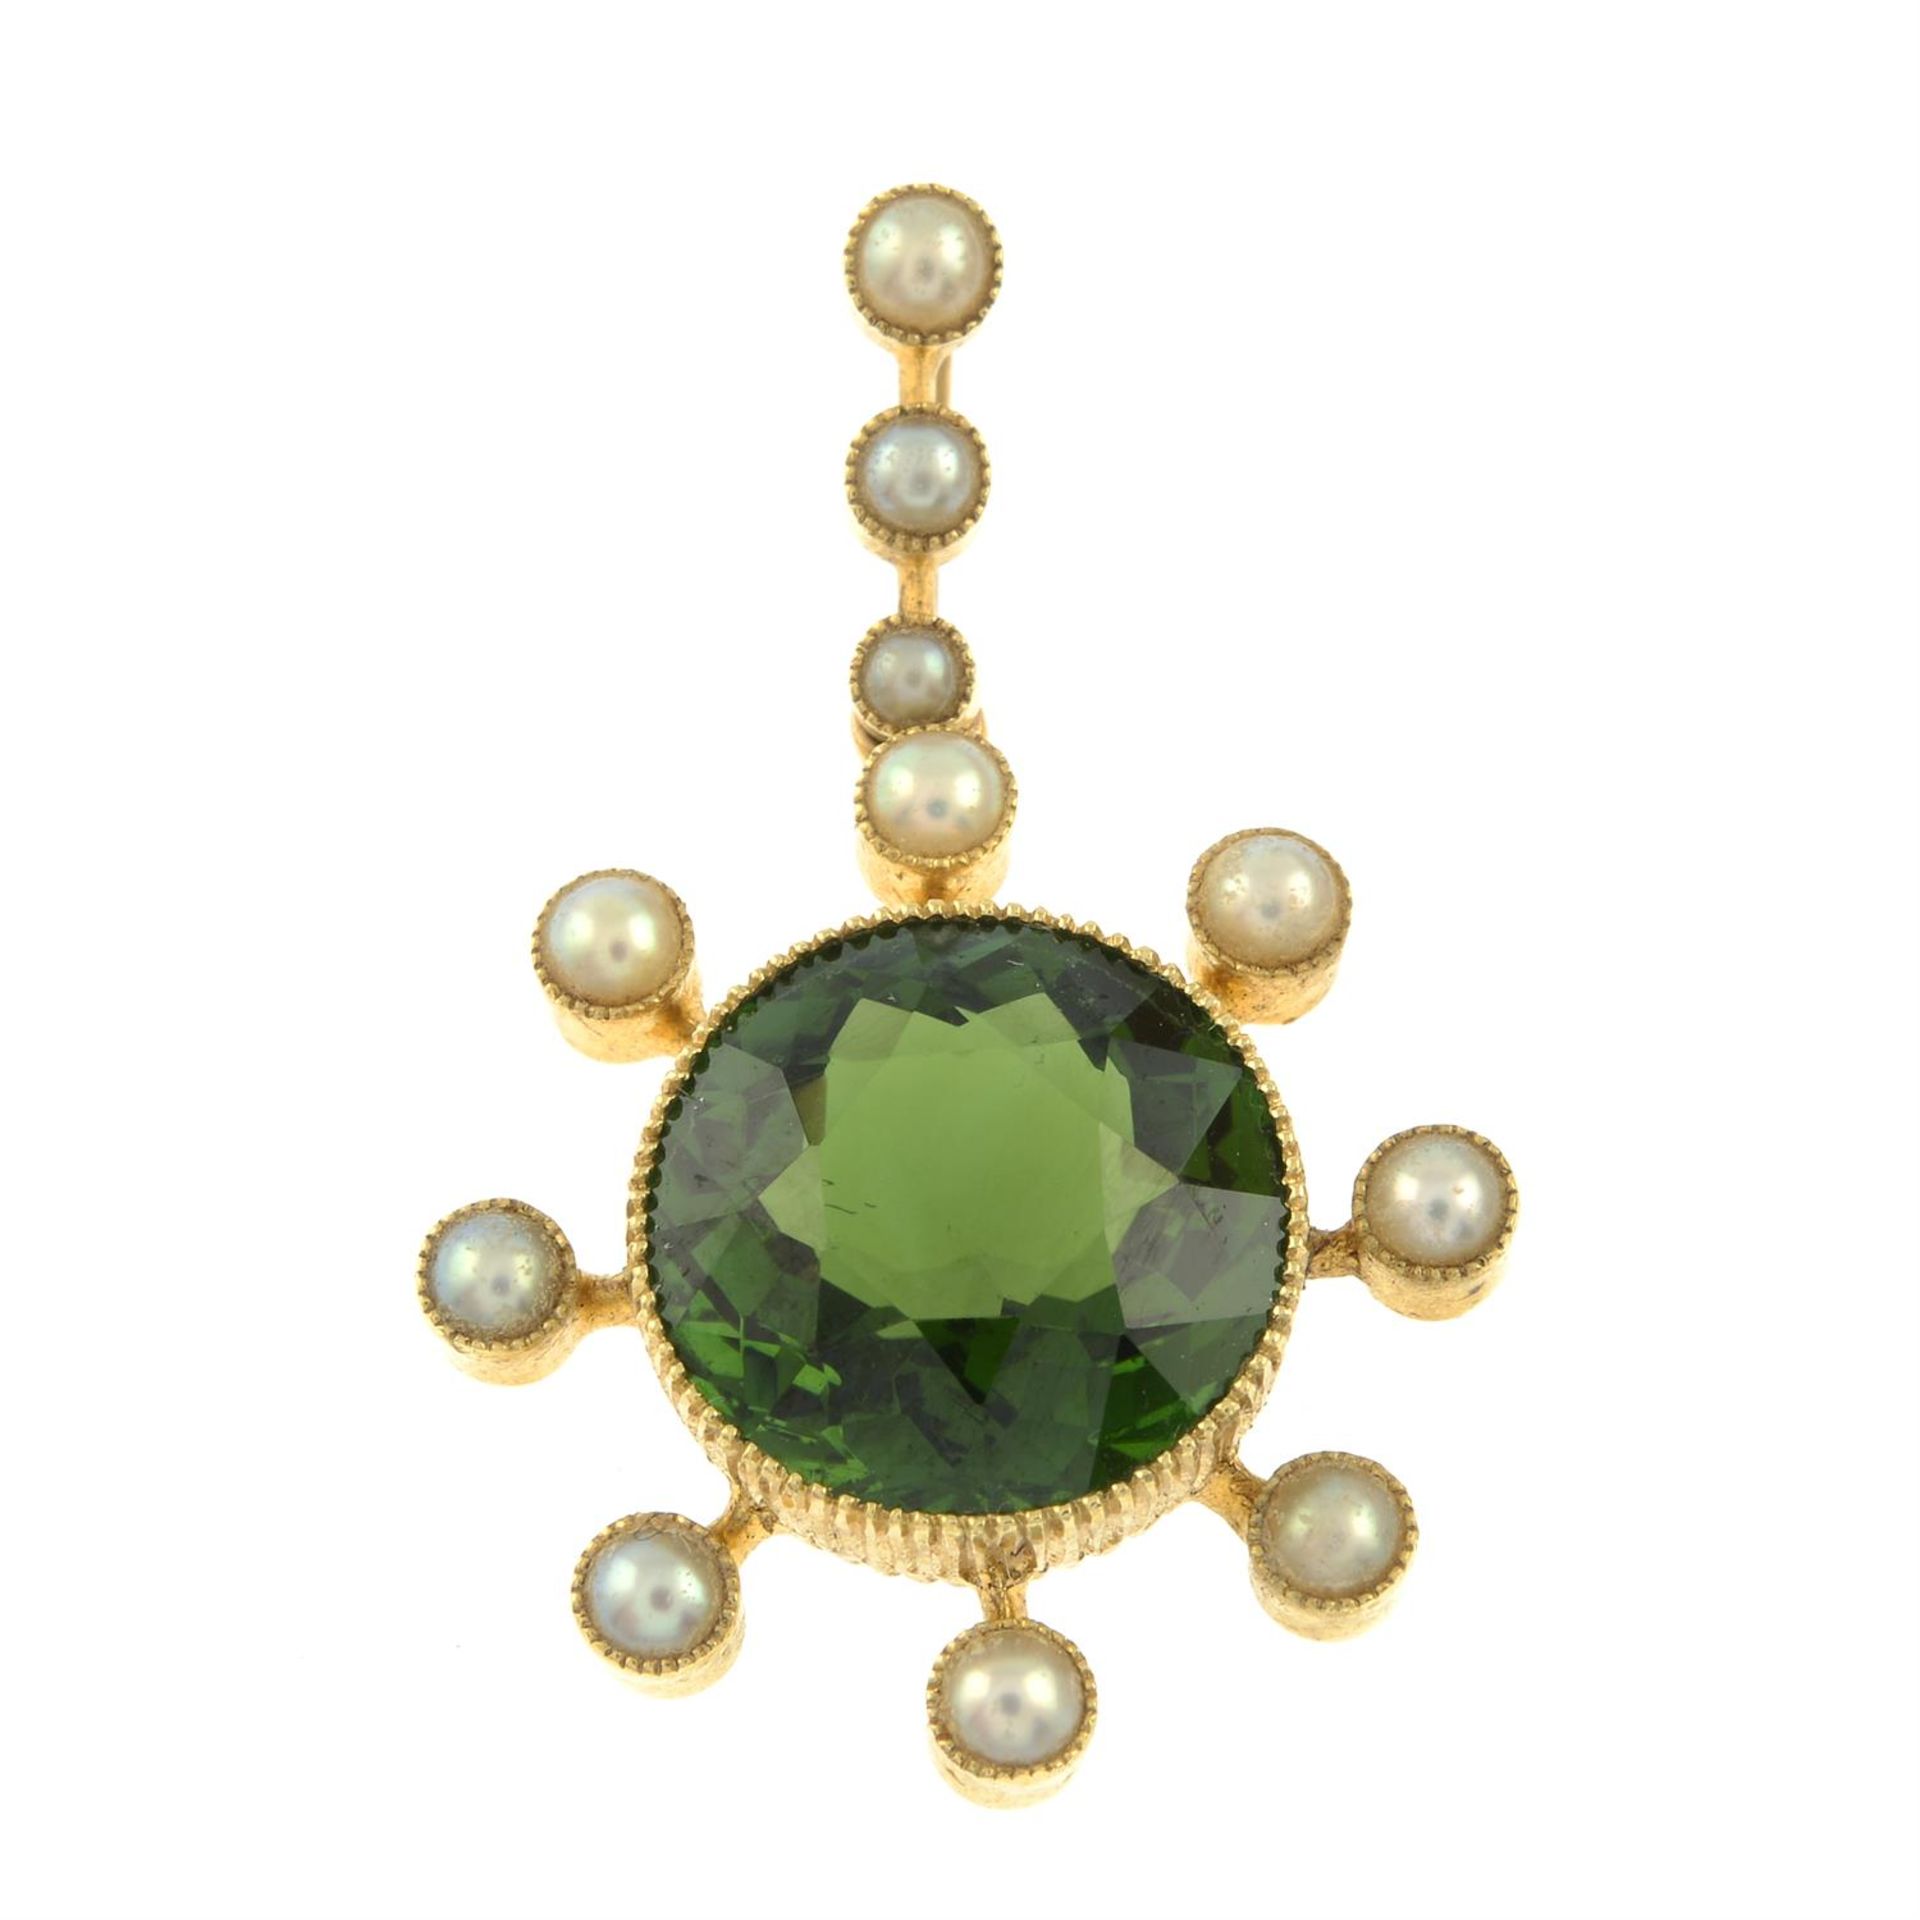 A late Victorian 15ct gold green tourmaline and split pearl pendant. - Image 2 of 4